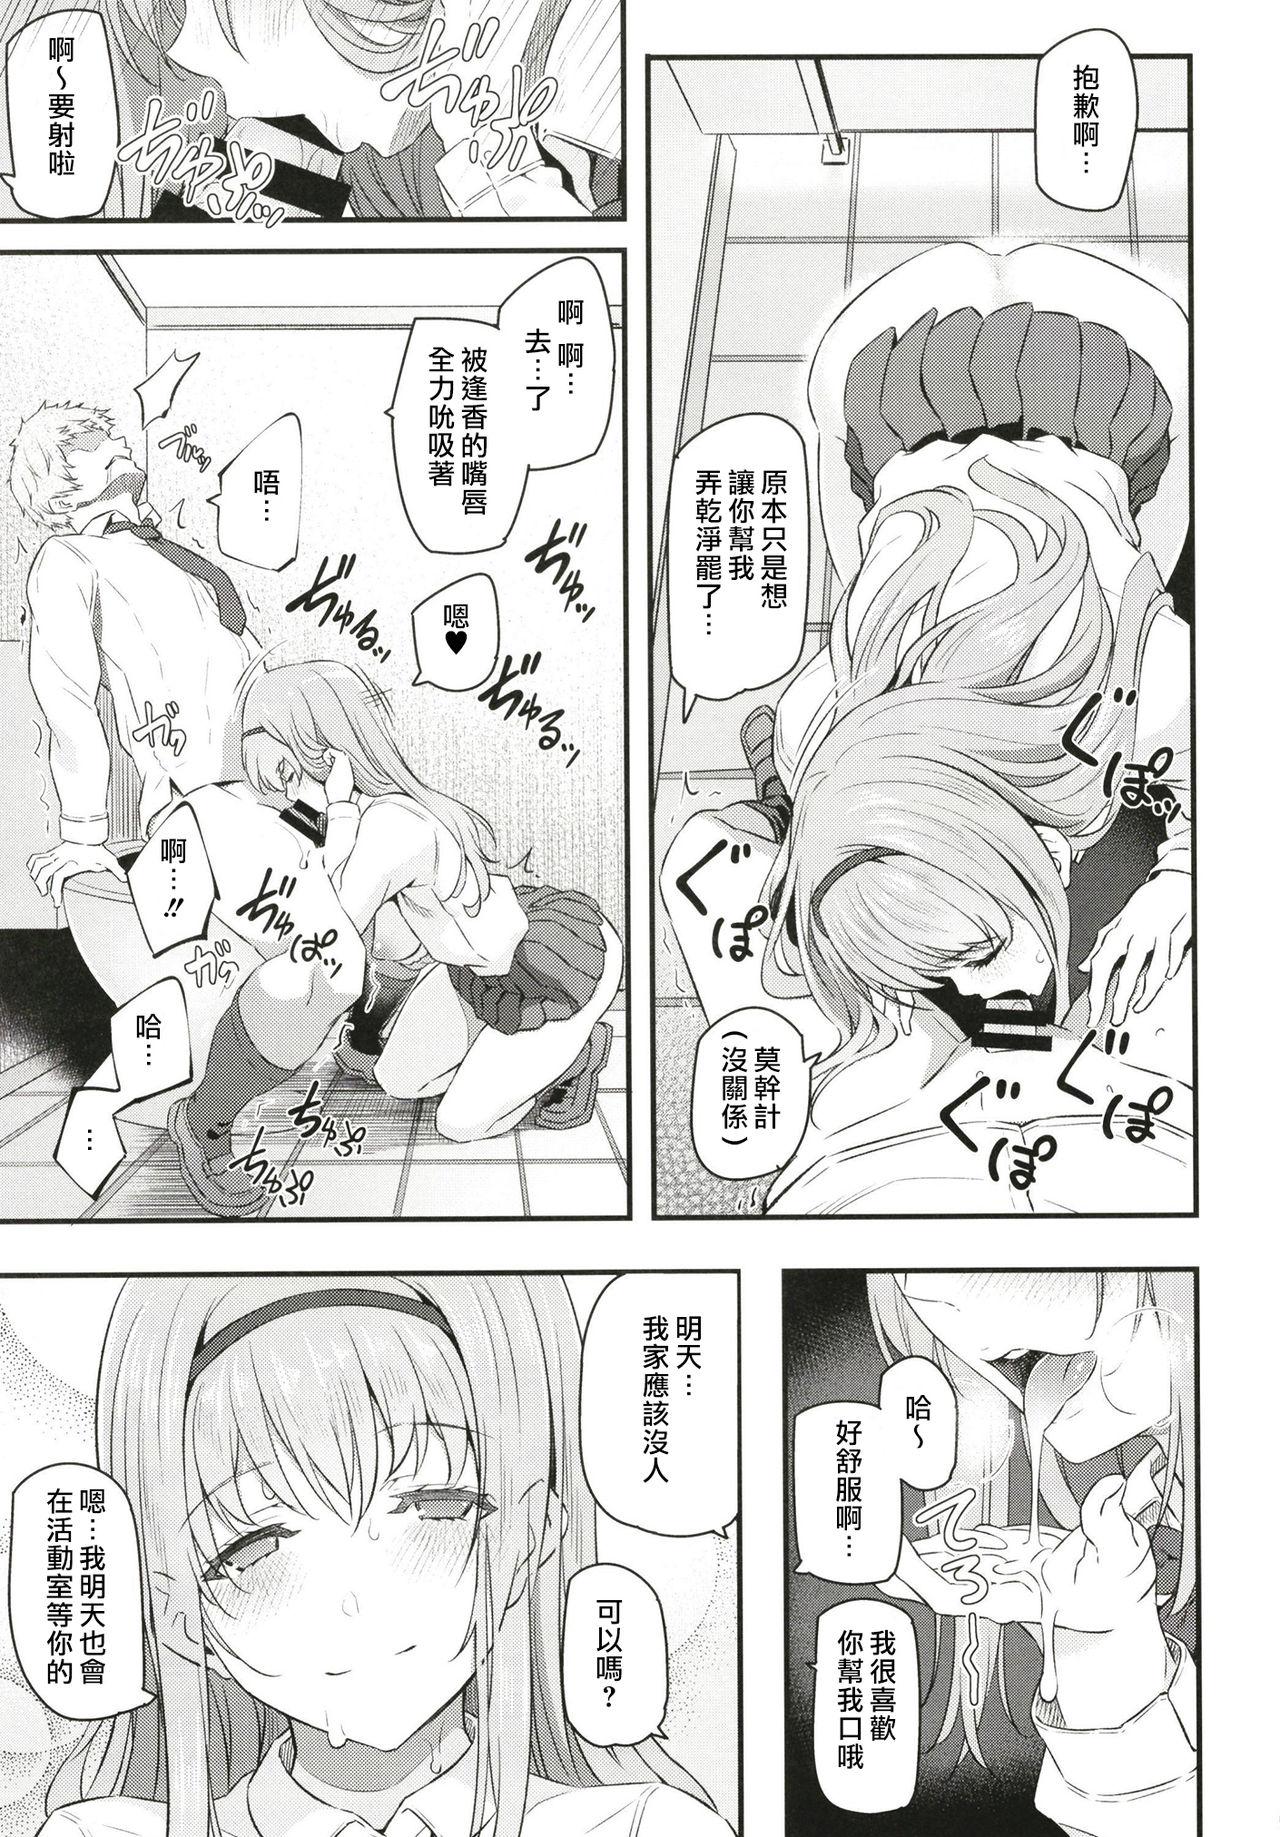 Eating Nemuri Hime - Original Pounded - Page 8